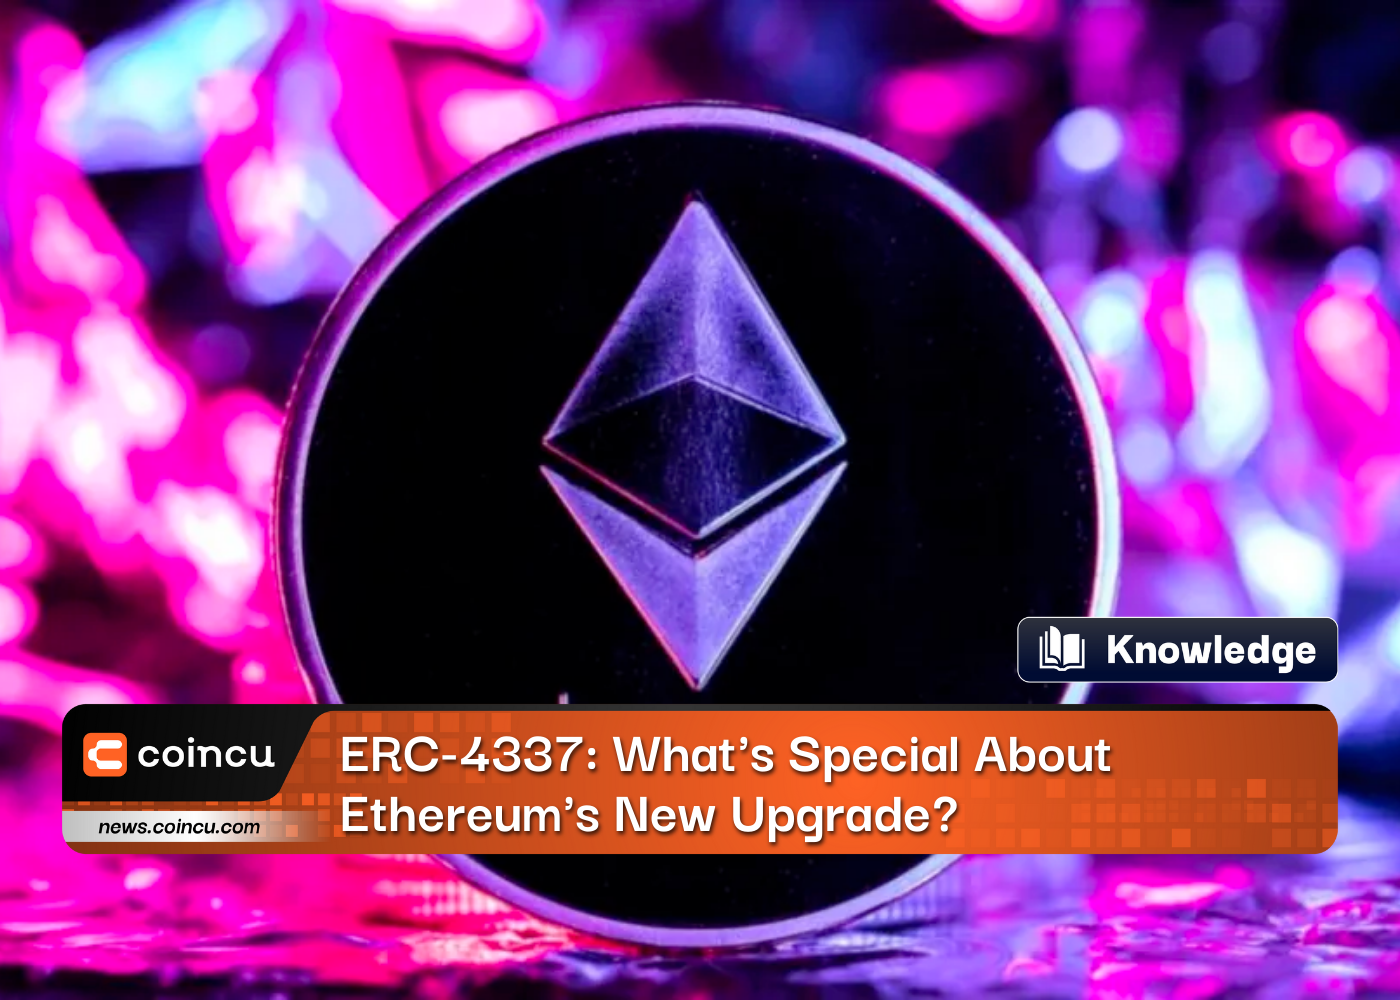 ERC-4337: What's Special About Ethereum's New Upgrade?